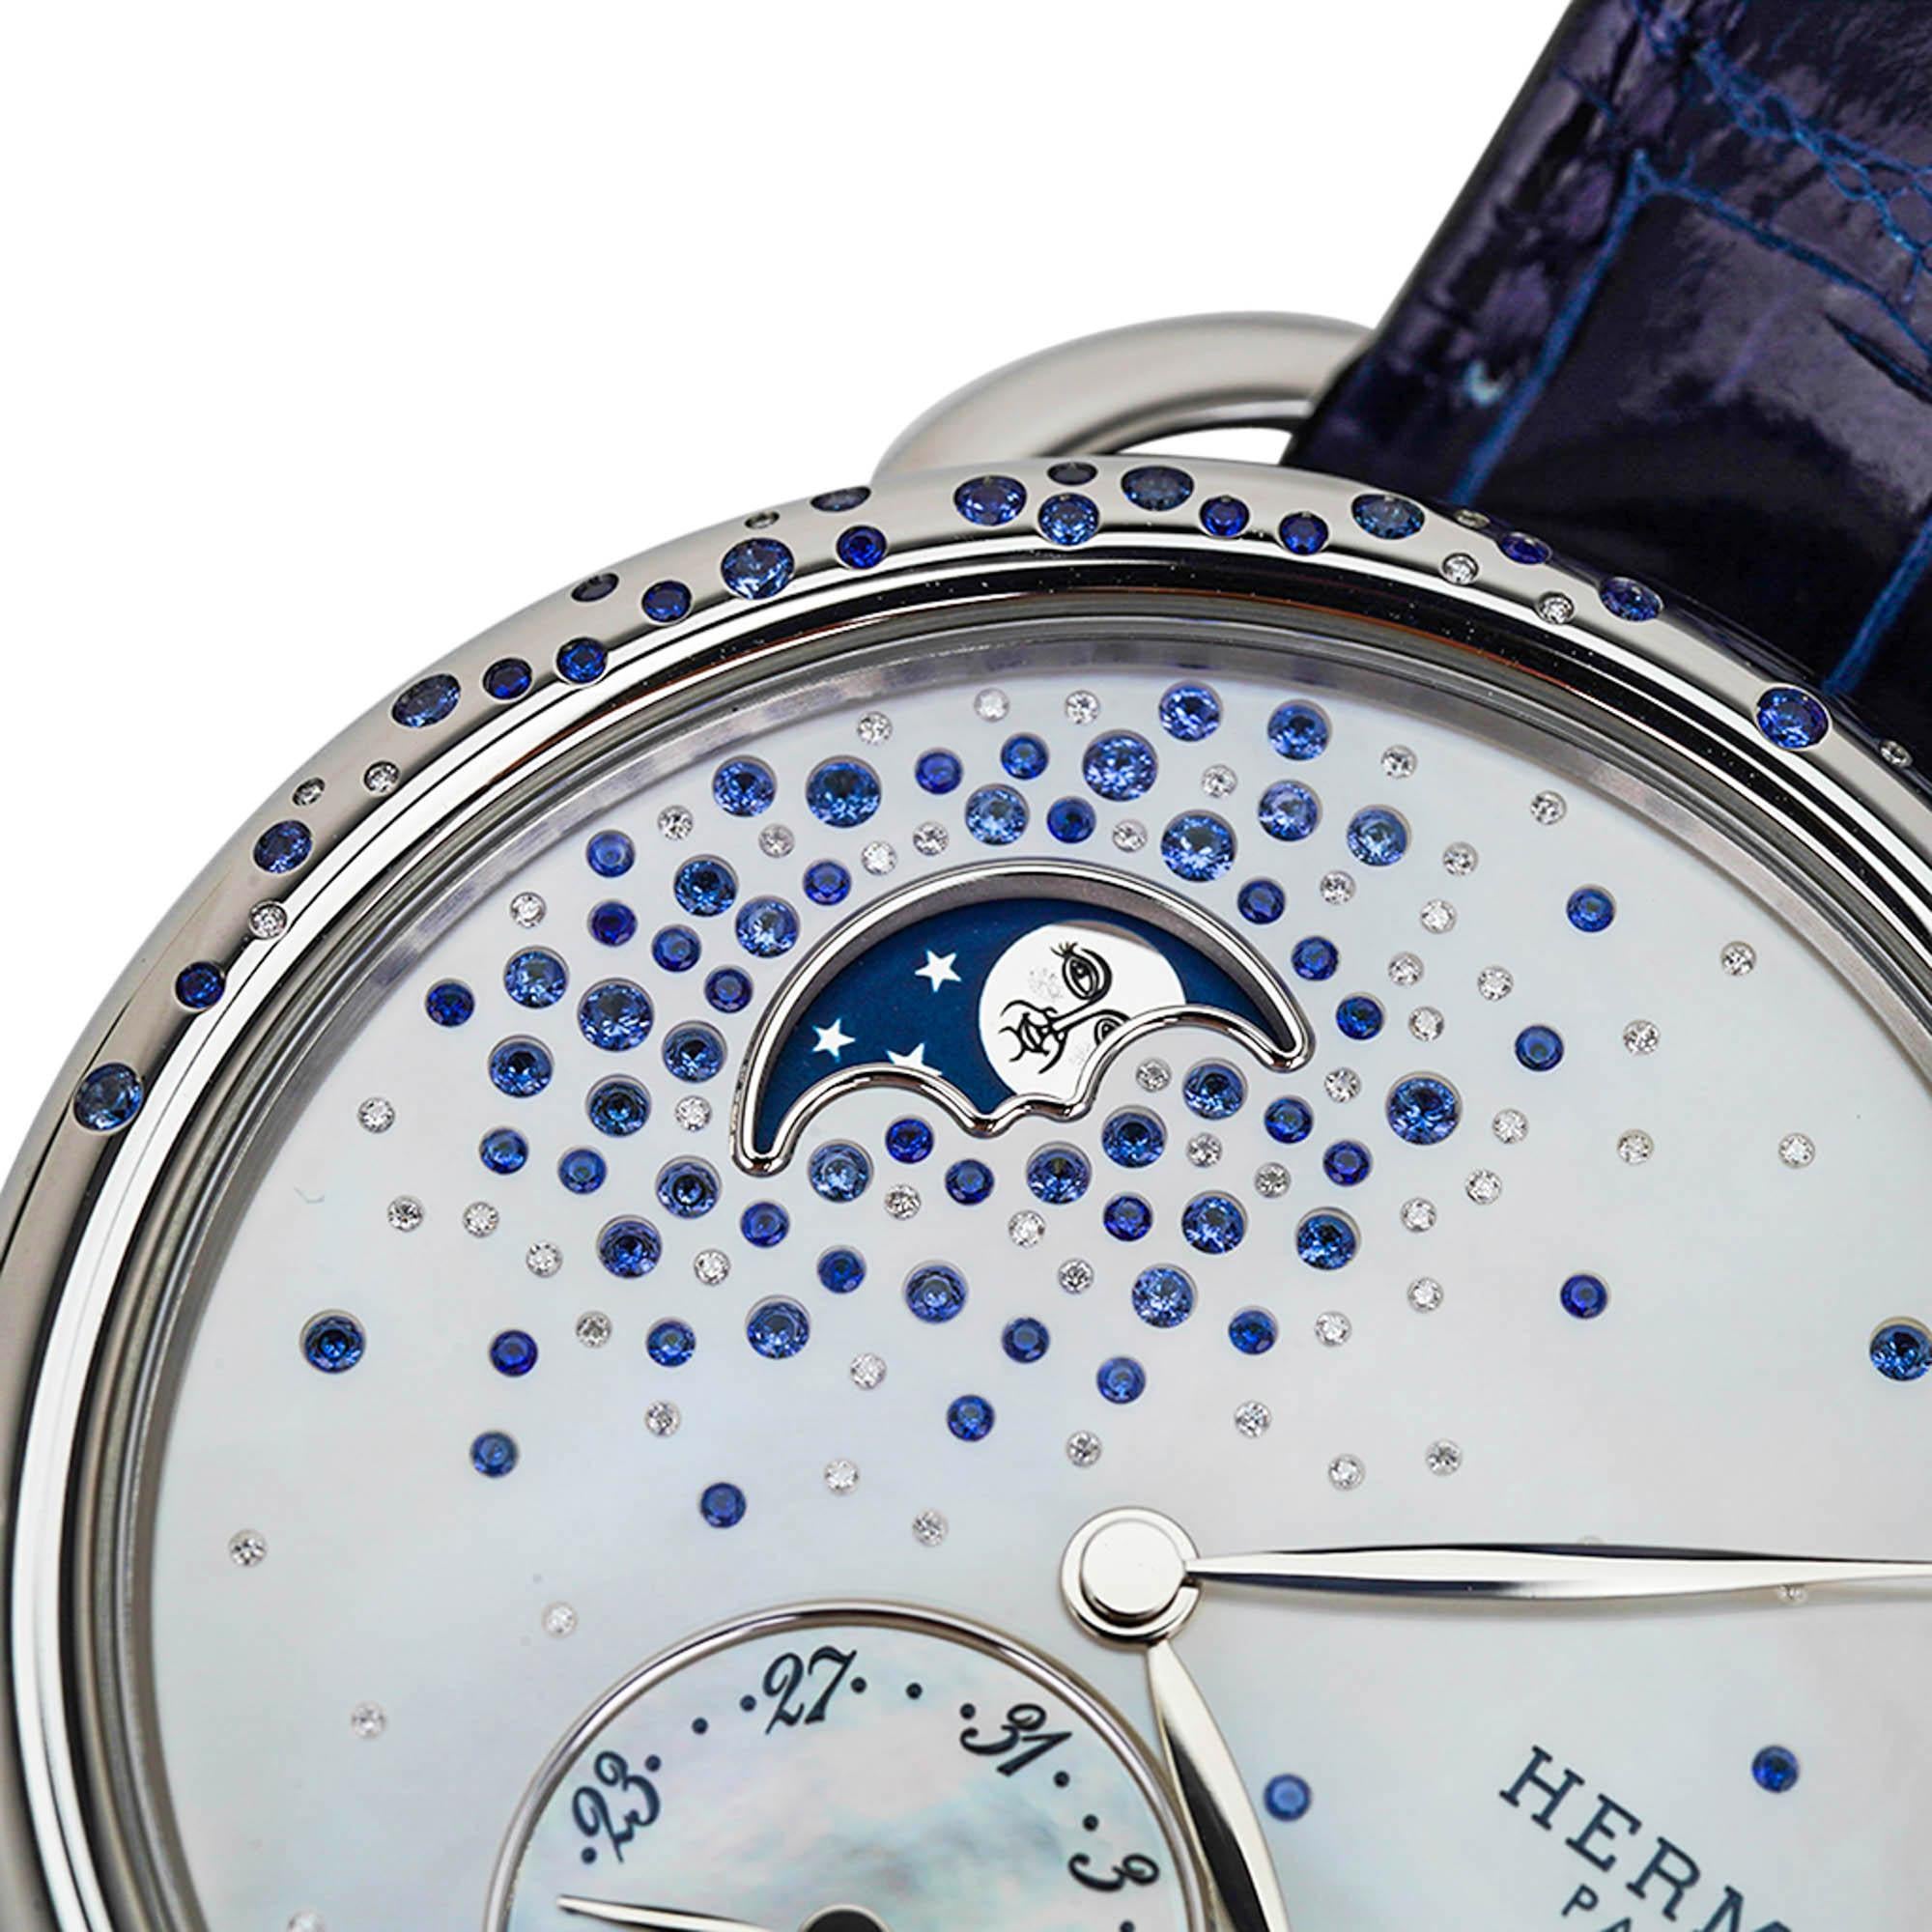 Mightychic offers an Hermes Arceau Petite Lune Watch featured in the 38 mm large model.
This beautiful diamond and sapphire set watch has gems sprinkled on the bezel and on the
mother of pearl dial.
The moon phase indicator has a blue background and